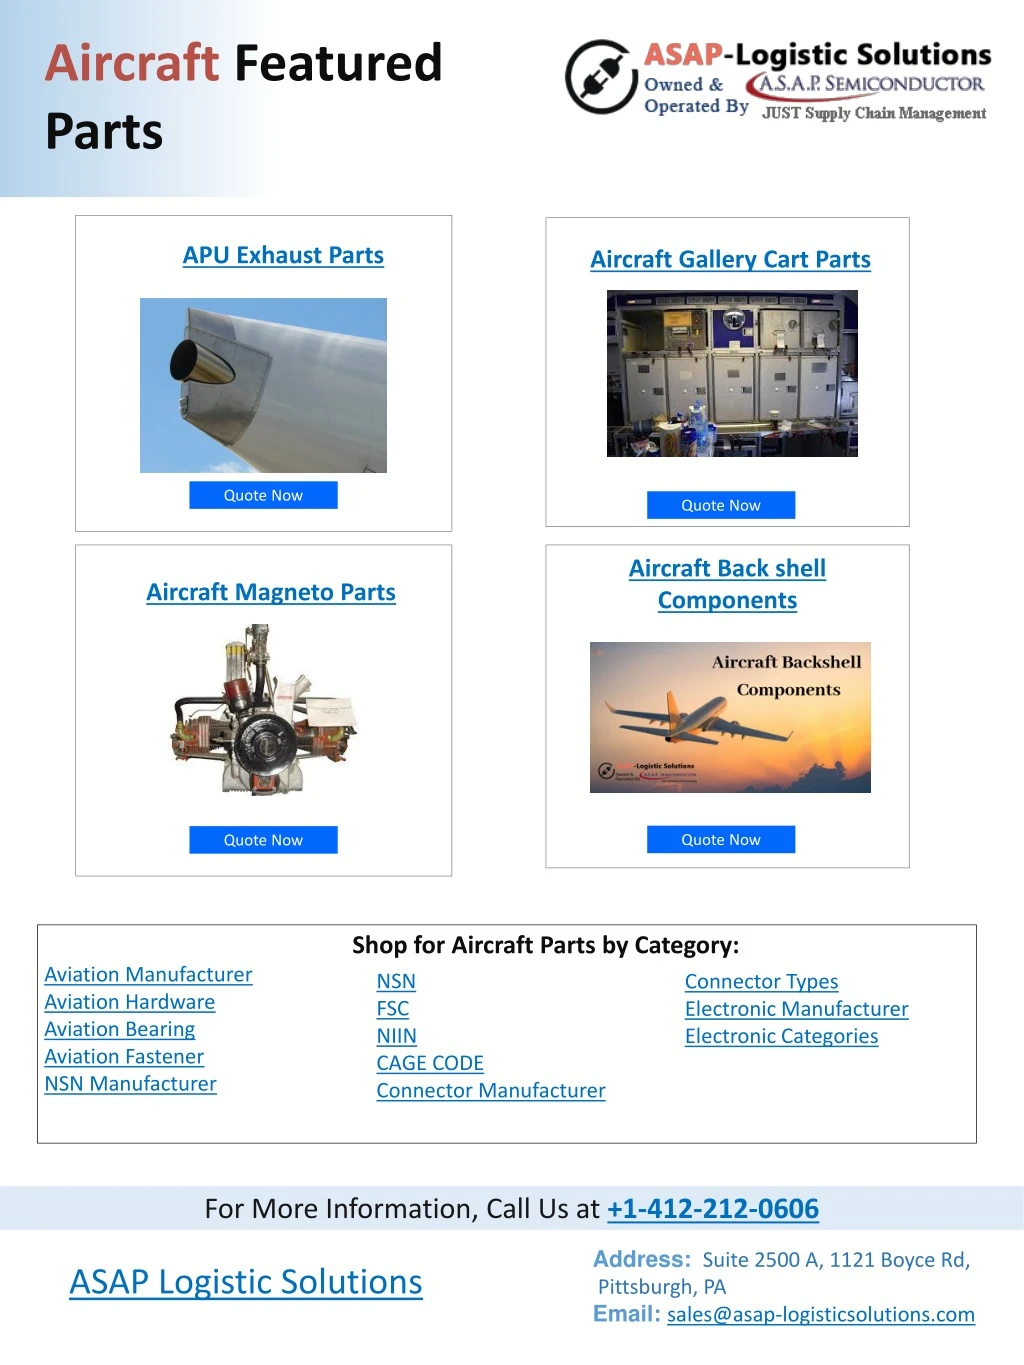 aircraft featured parts